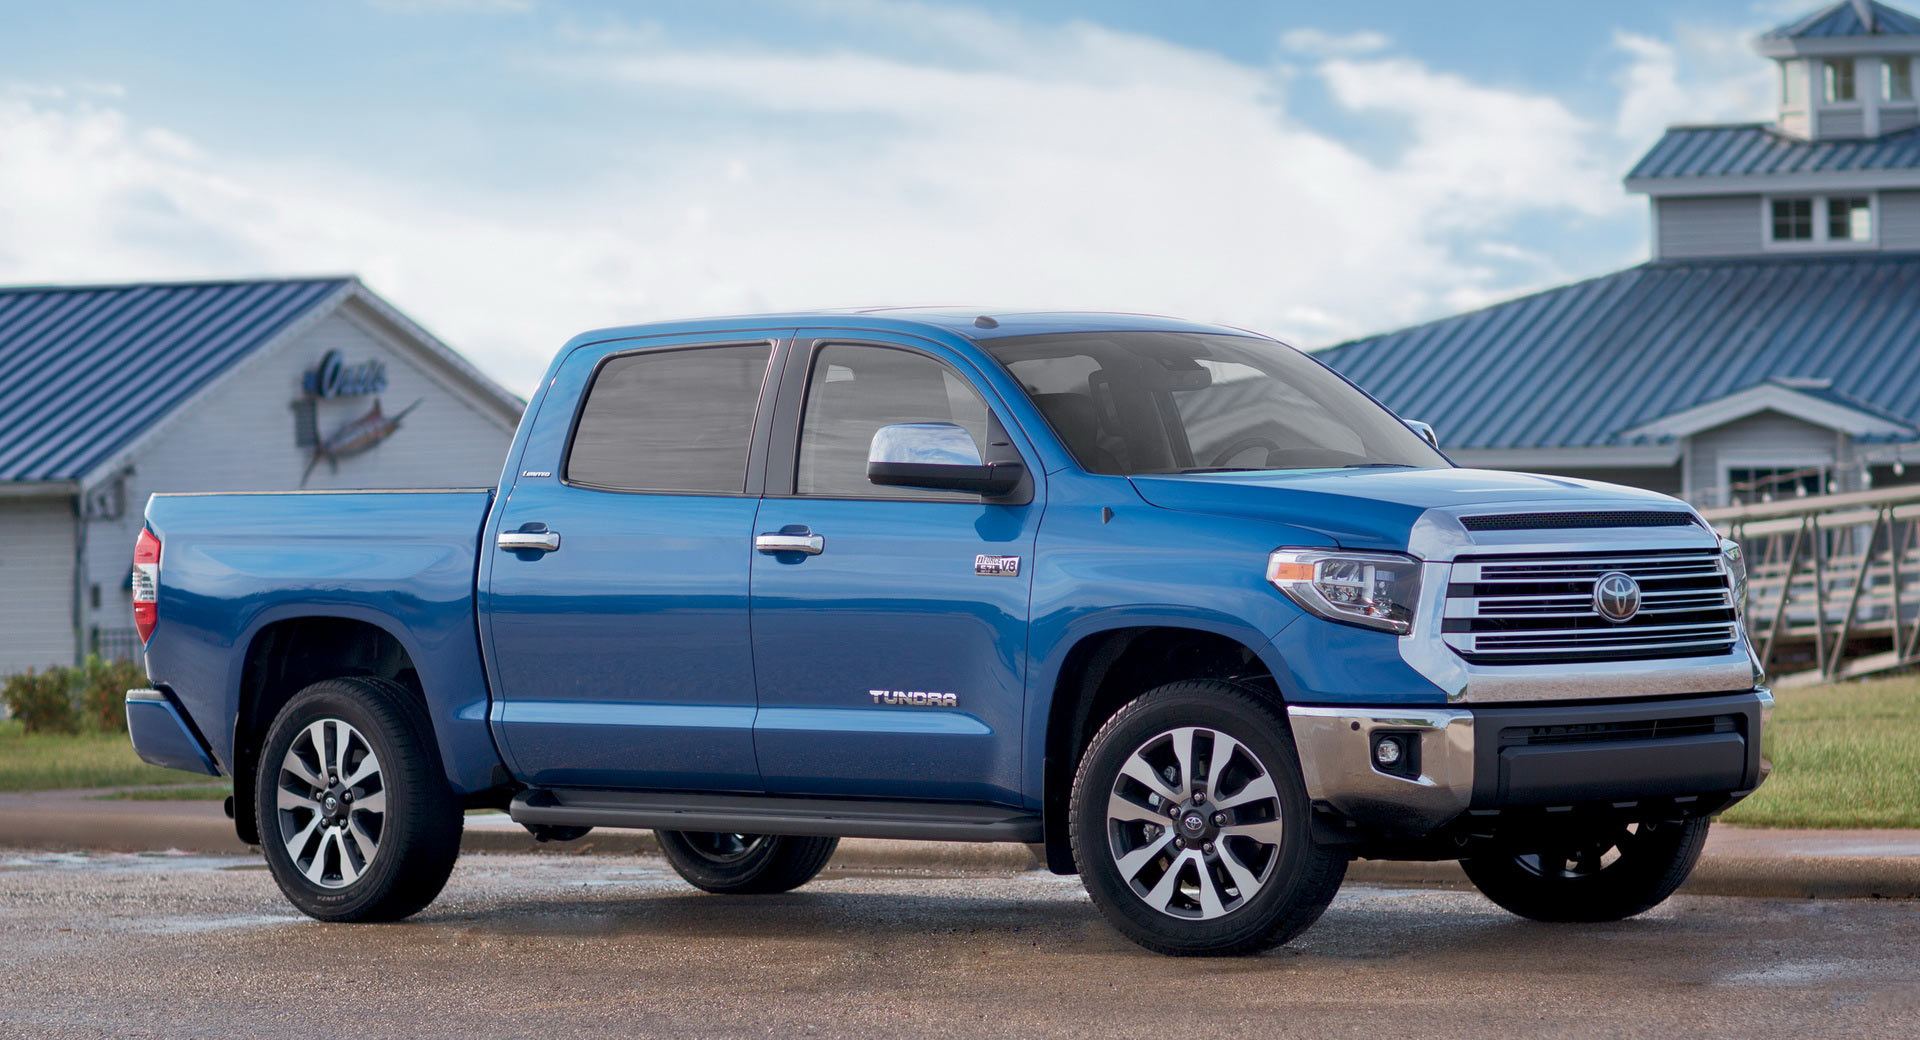 Toyota Says Manufacturing Capacity Helped The Tacoma, Hurt The Tundra